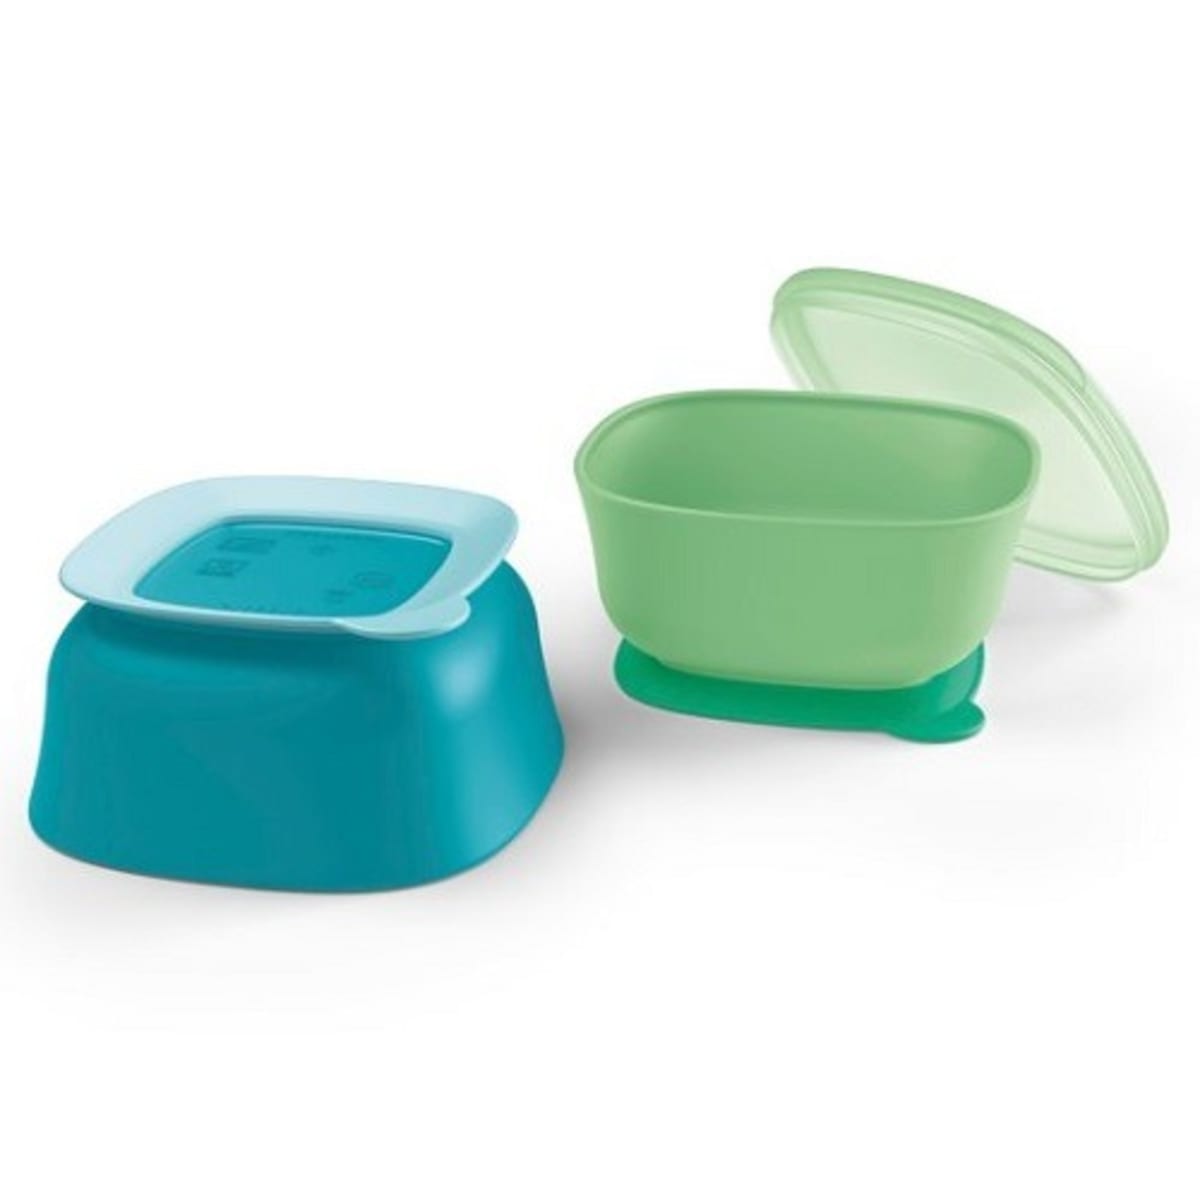 Nuk B.P.A Free Sunction Baby Bowl With Lid - 2 Pack - Assorted Colors